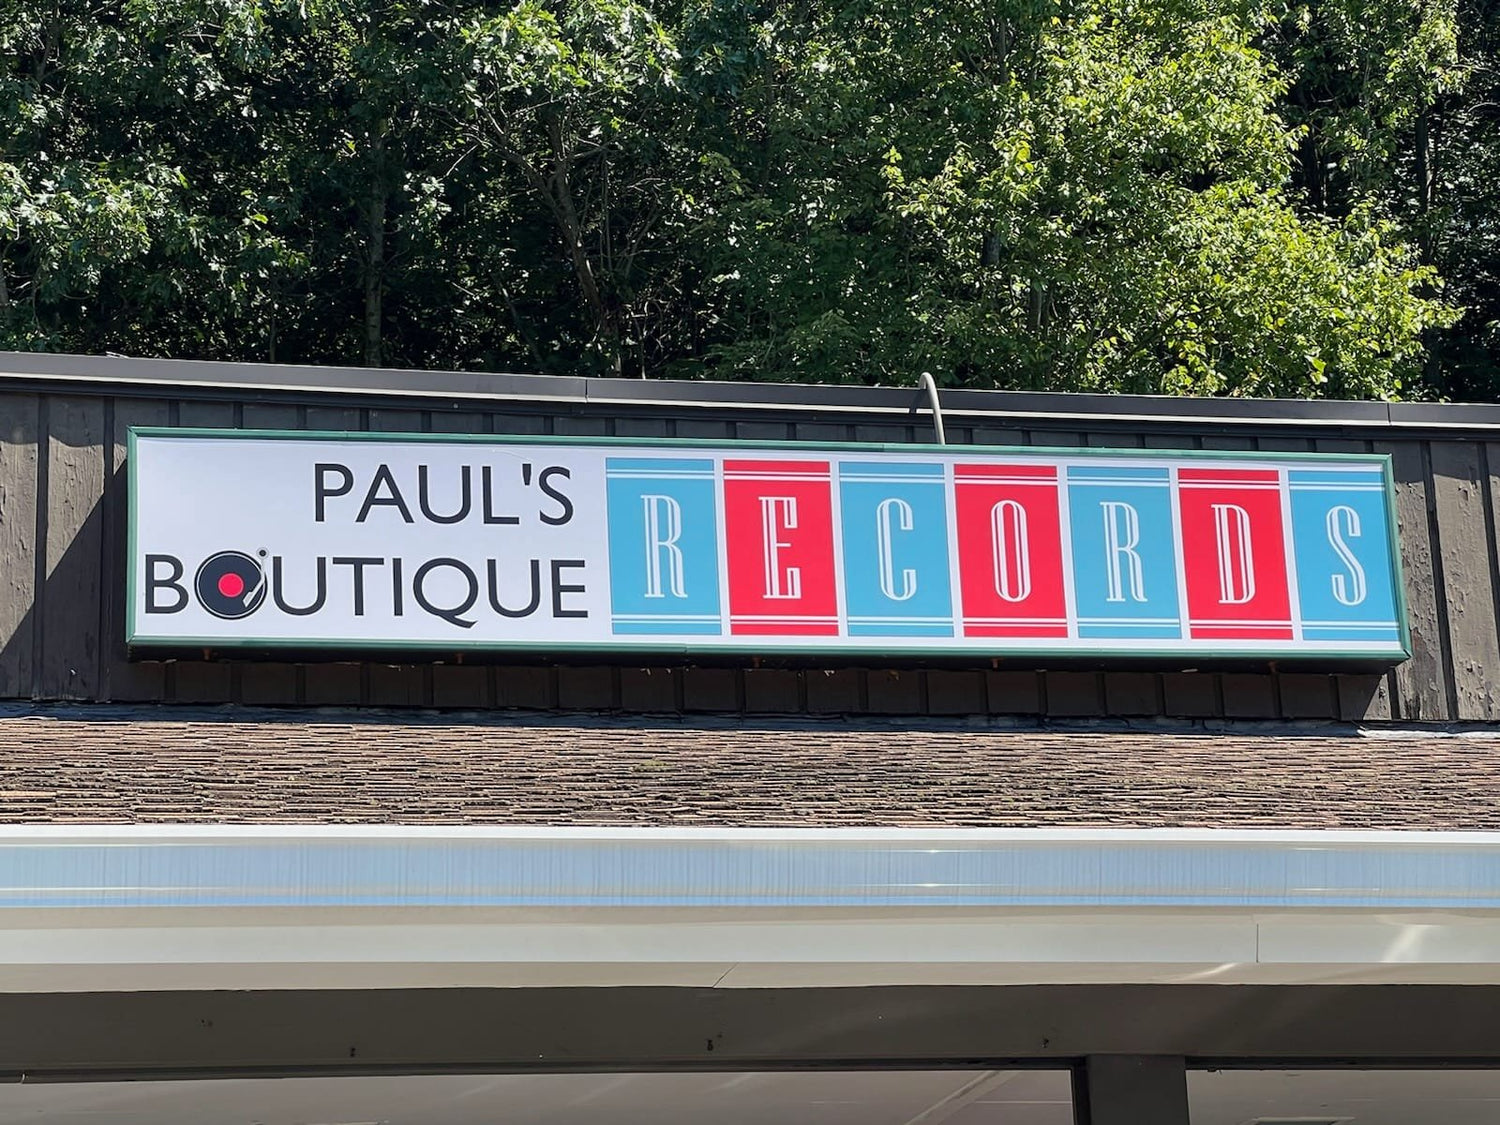 Paul's Boutique Records Giftcard – Paul's Boutique Records